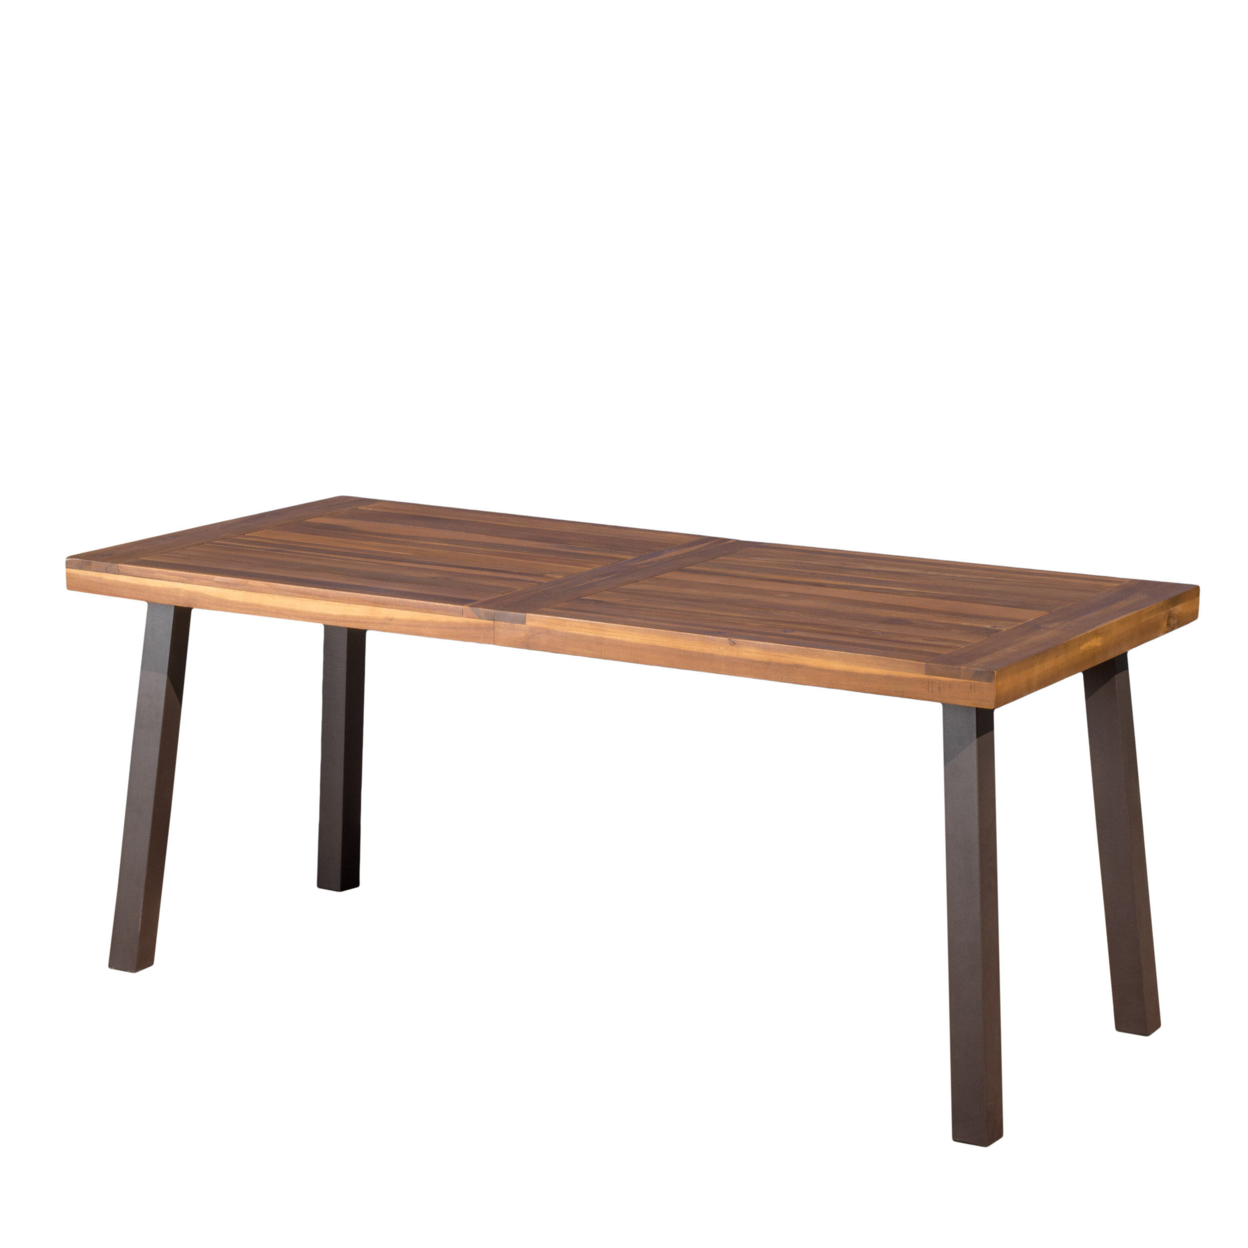 Daria Natural Stained Acacia Wood Dining Table